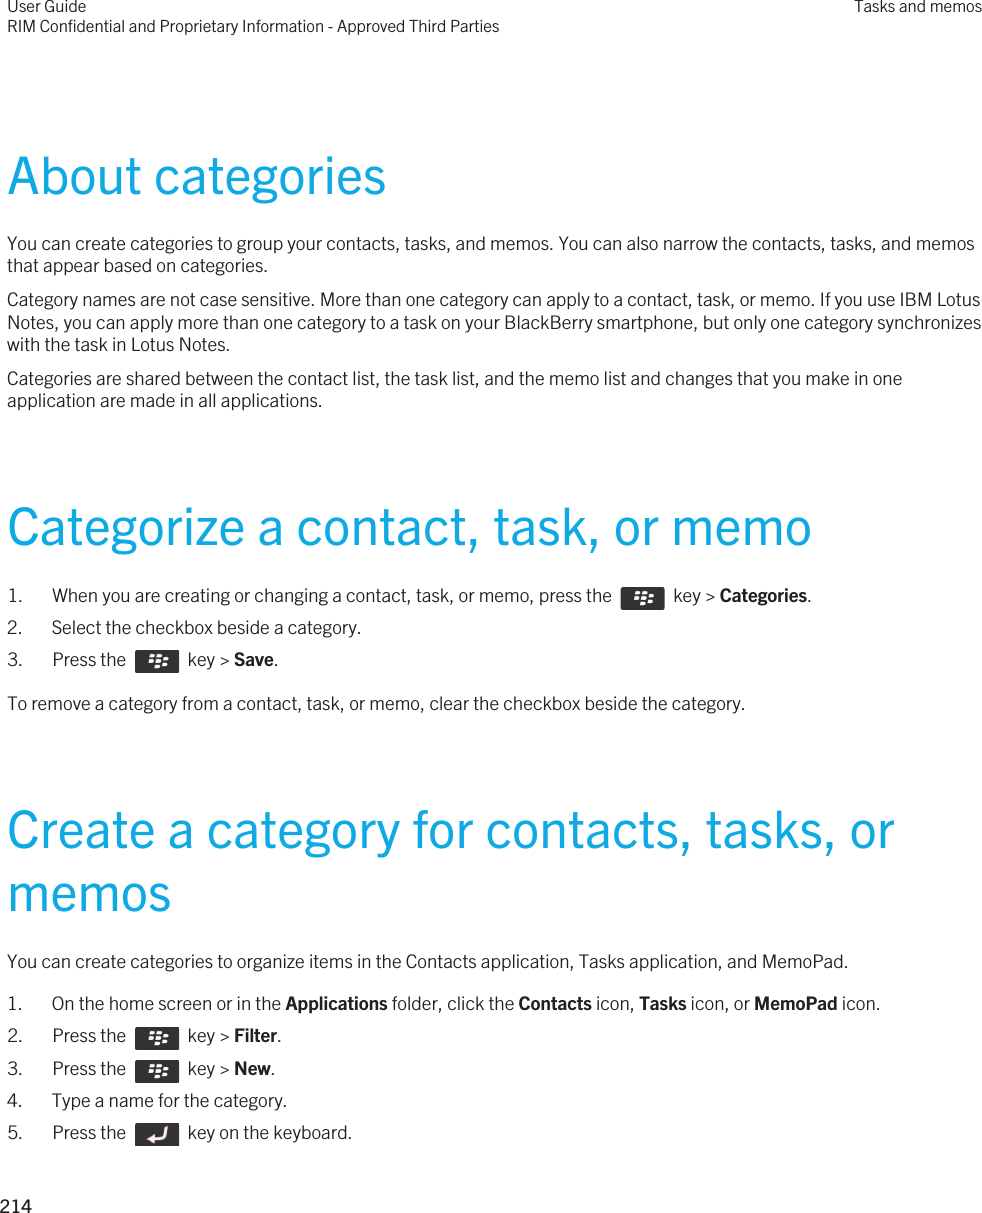 About categoriesYou can create categories to group your contacts, tasks, and memos. You can also narrow the contacts, tasks, and memos that appear based on categories.Category names are not case sensitive. More than one category can apply to a contact, task, or memo. If you use IBM Lotus Notes, you can apply more than one category to a task on your BlackBerry smartphone, but only one category synchronizes with the task in Lotus Notes.Categories are shared between the contact list, the task list, and the memo list and changes that you make in one application are made in all applications.Categorize a contact, task, or memo1.  When you are creating or changing a contact, task, or memo, press the    key &gt; Categories. 2. Select the checkbox beside a category.3.  Press the    key &gt; Save. To remove a category from a contact, task, or memo, clear the checkbox beside the category.Create a category for contacts, tasks, or memosYou can create categories to organize items in the Contacts application, Tasks application, and MemoPad.1. On the home screen or in the Applications folder, click the Contacts icon, Tasks icon, or MemoPad icon.2.  Press the    key &gt; Filter. 3.  Press the    key &gt; New. 4. Type a name for the category.5.  Press the    key on the keyboard. User GuideRIM Confidential and Proprietary Information - Approved Third PartiesTasks and memos214 